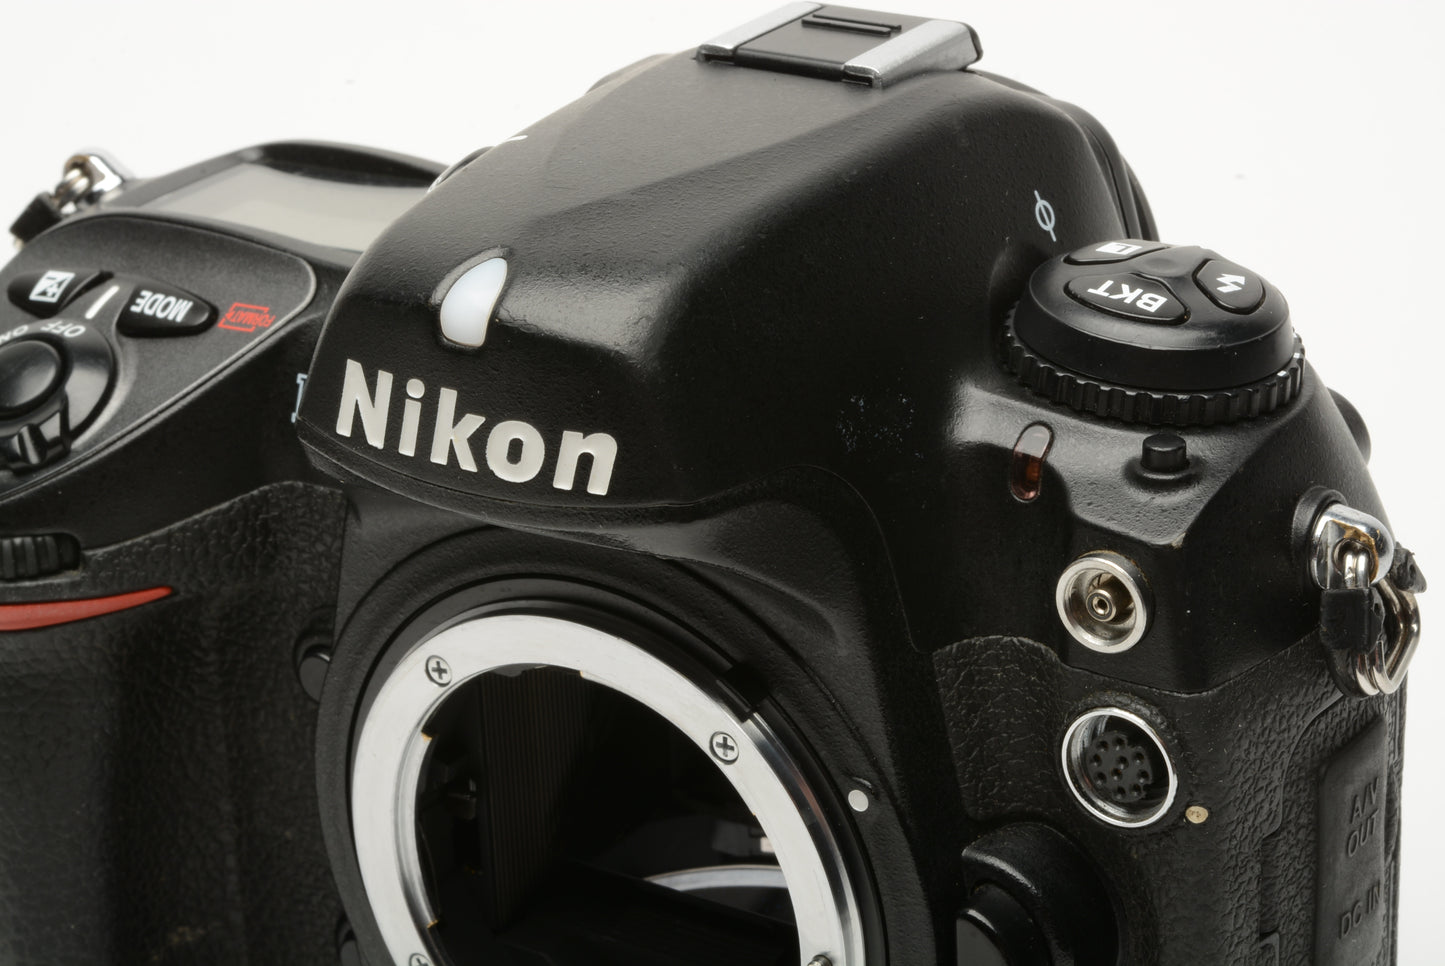 Nikon D2H DSLR body, batt+charger+strap+8GB Cf, tested, great, 105K Acts, still great!